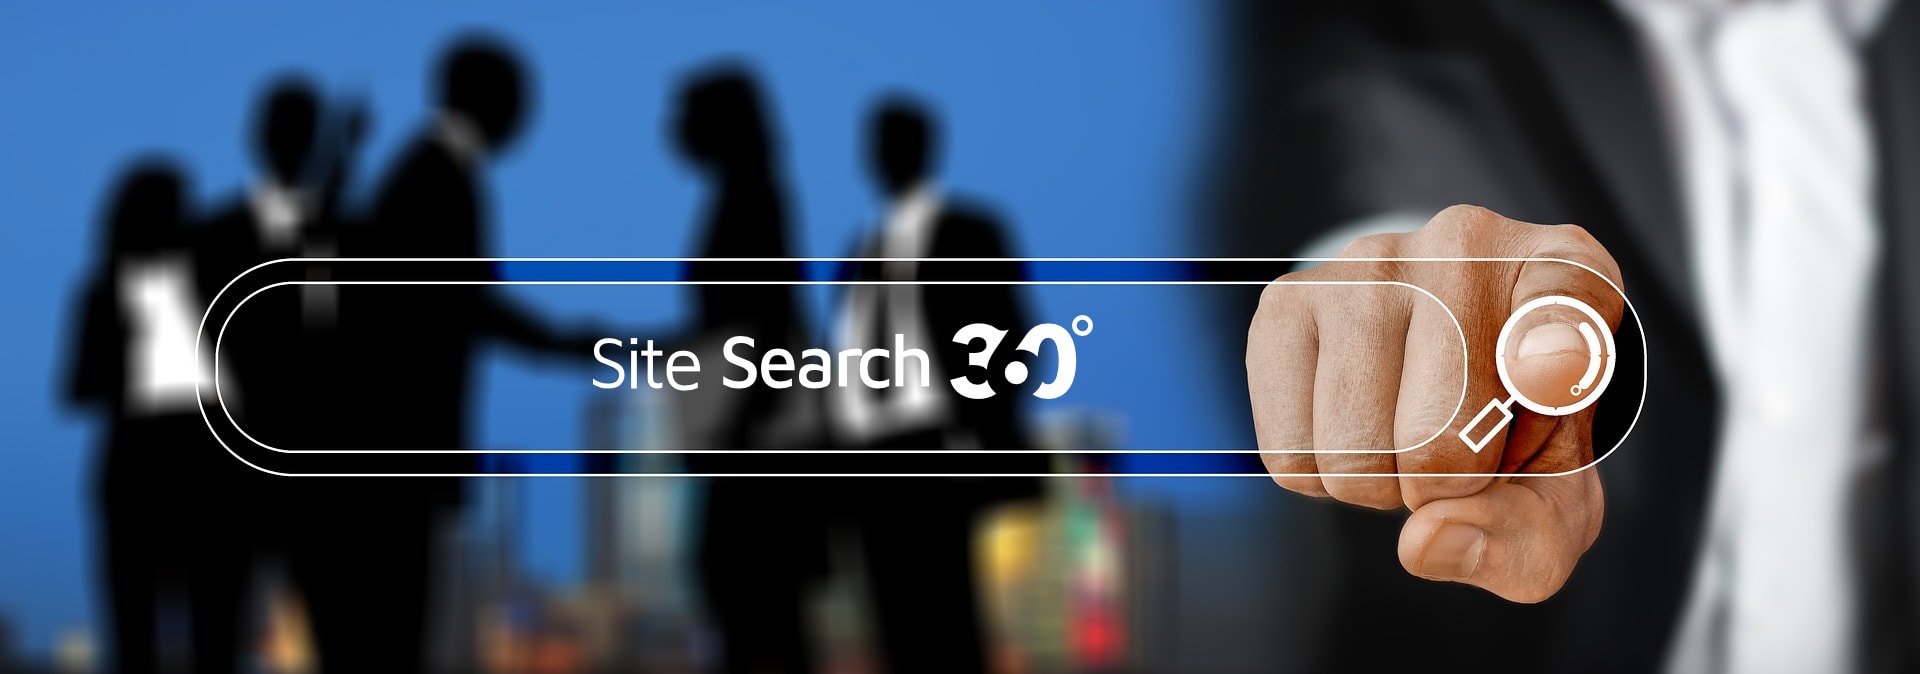 Meet site search 360 support team search specialist